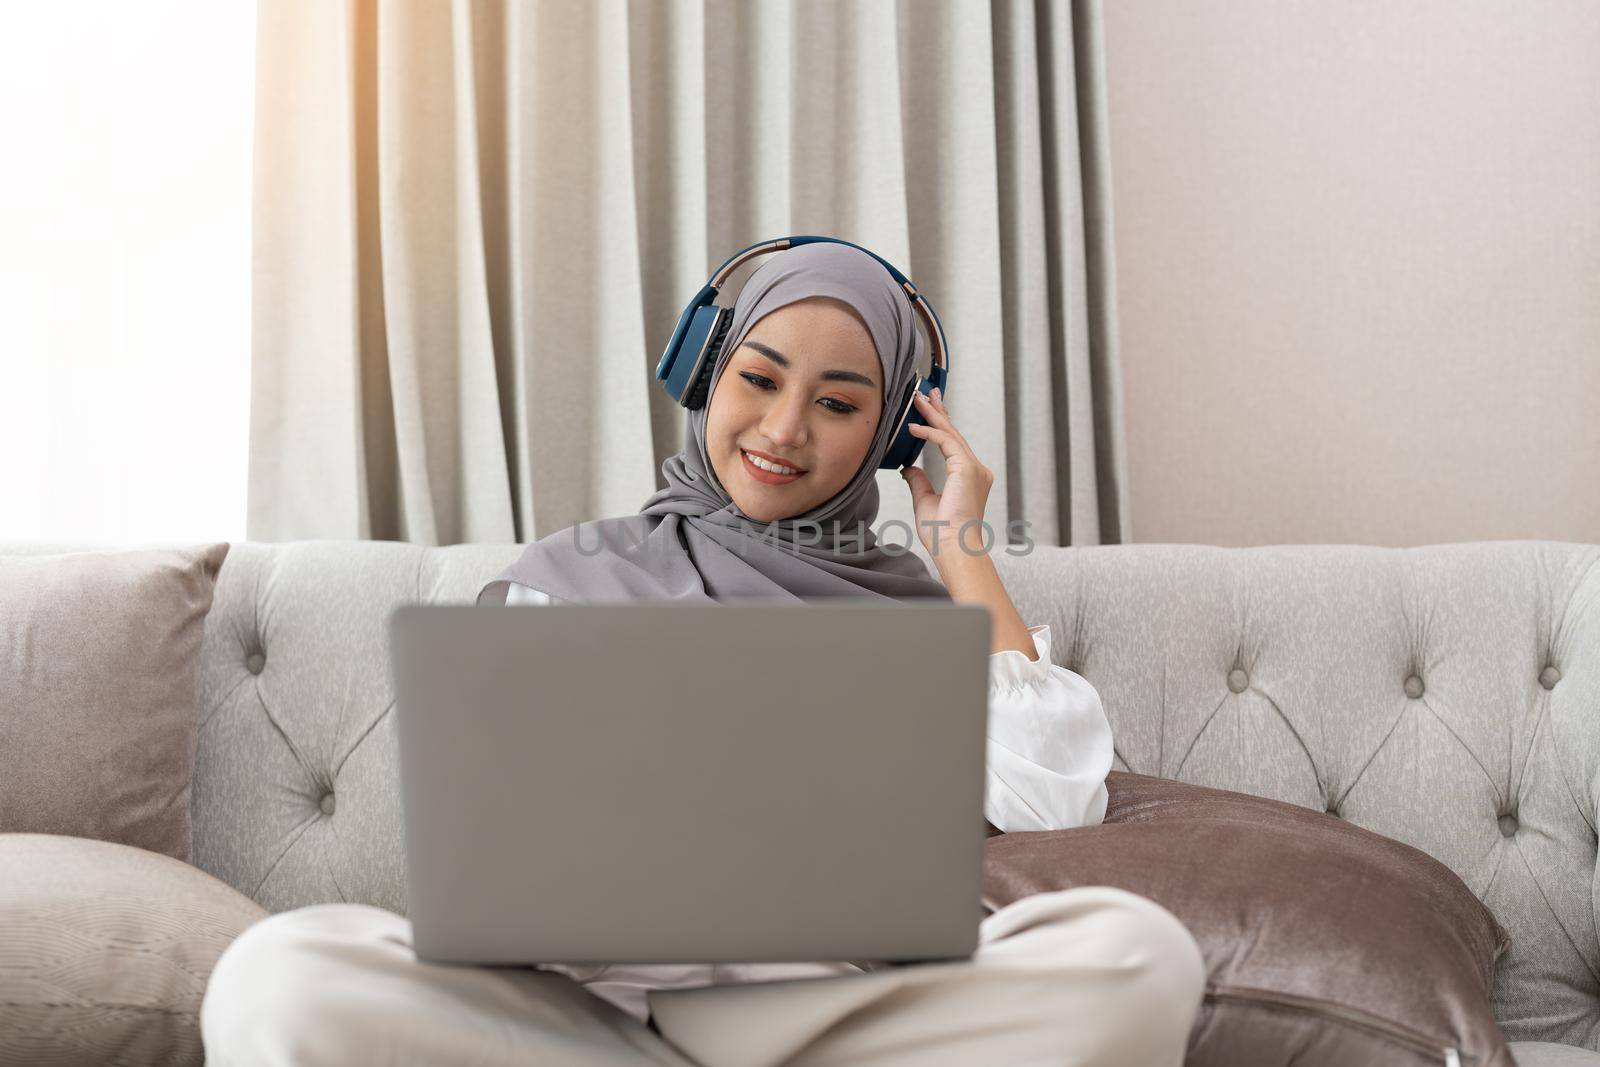 Asian muslim woman having video teleconference on her laptop at home, online learning or working from home concept by nateemee